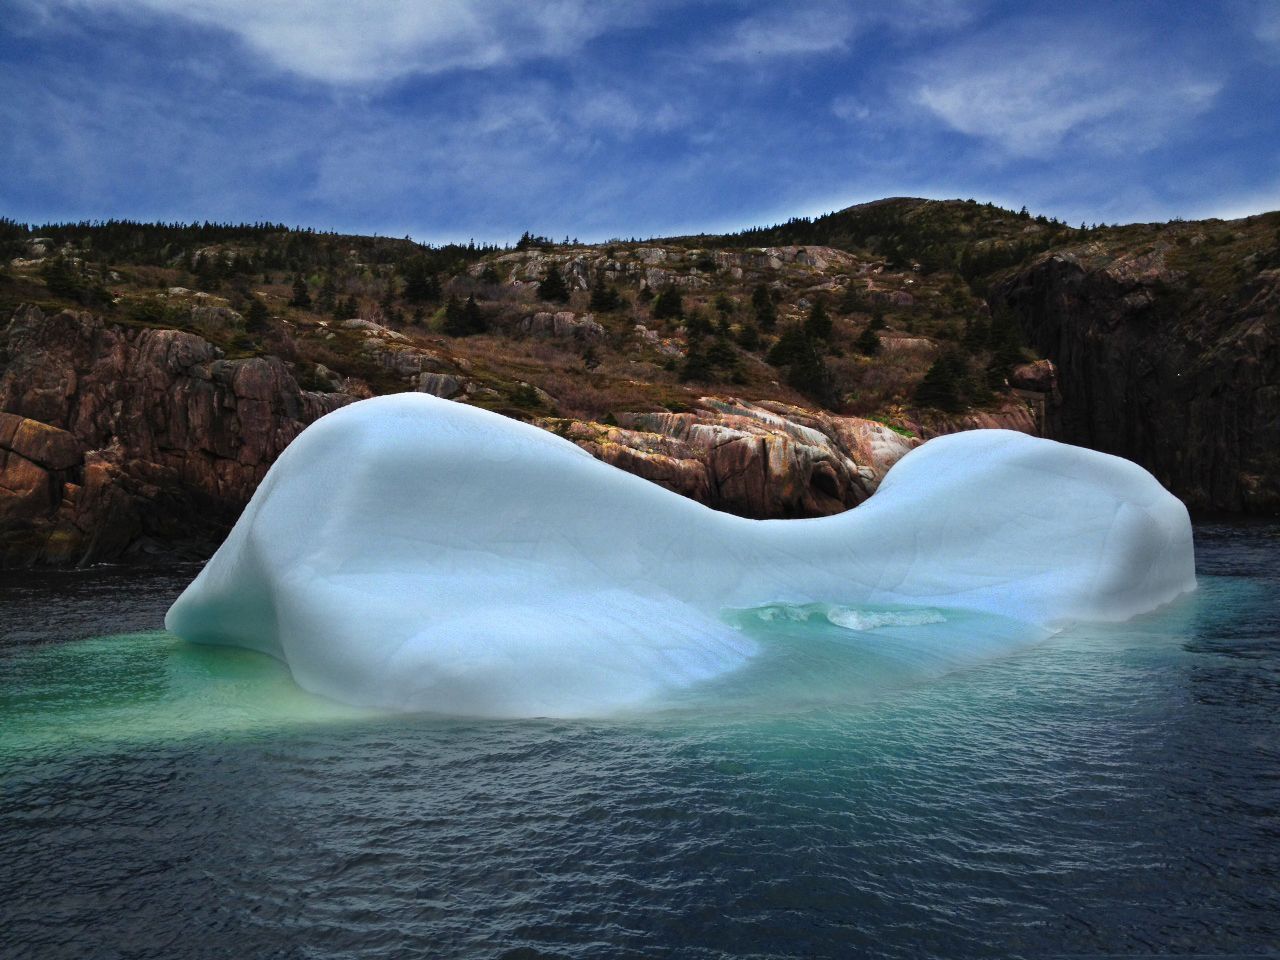 Quirpon Island's mind-blowing icebergs along iceberg alley